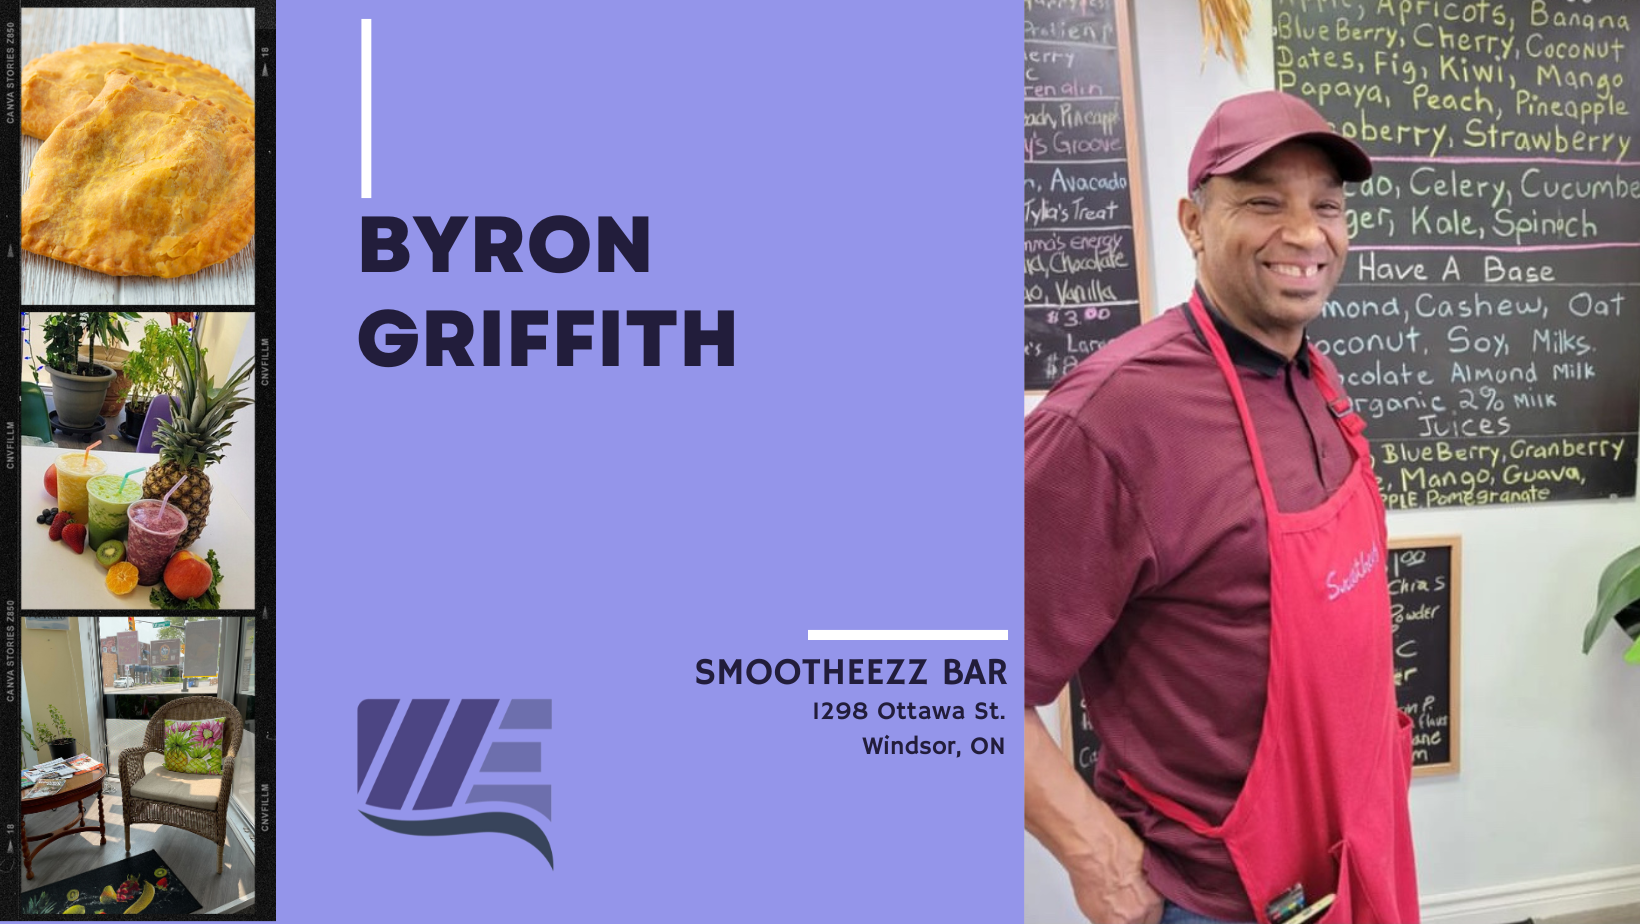 Byron Griffith, Owner and Founder of Smootheezz Bar in Windsor Ontario